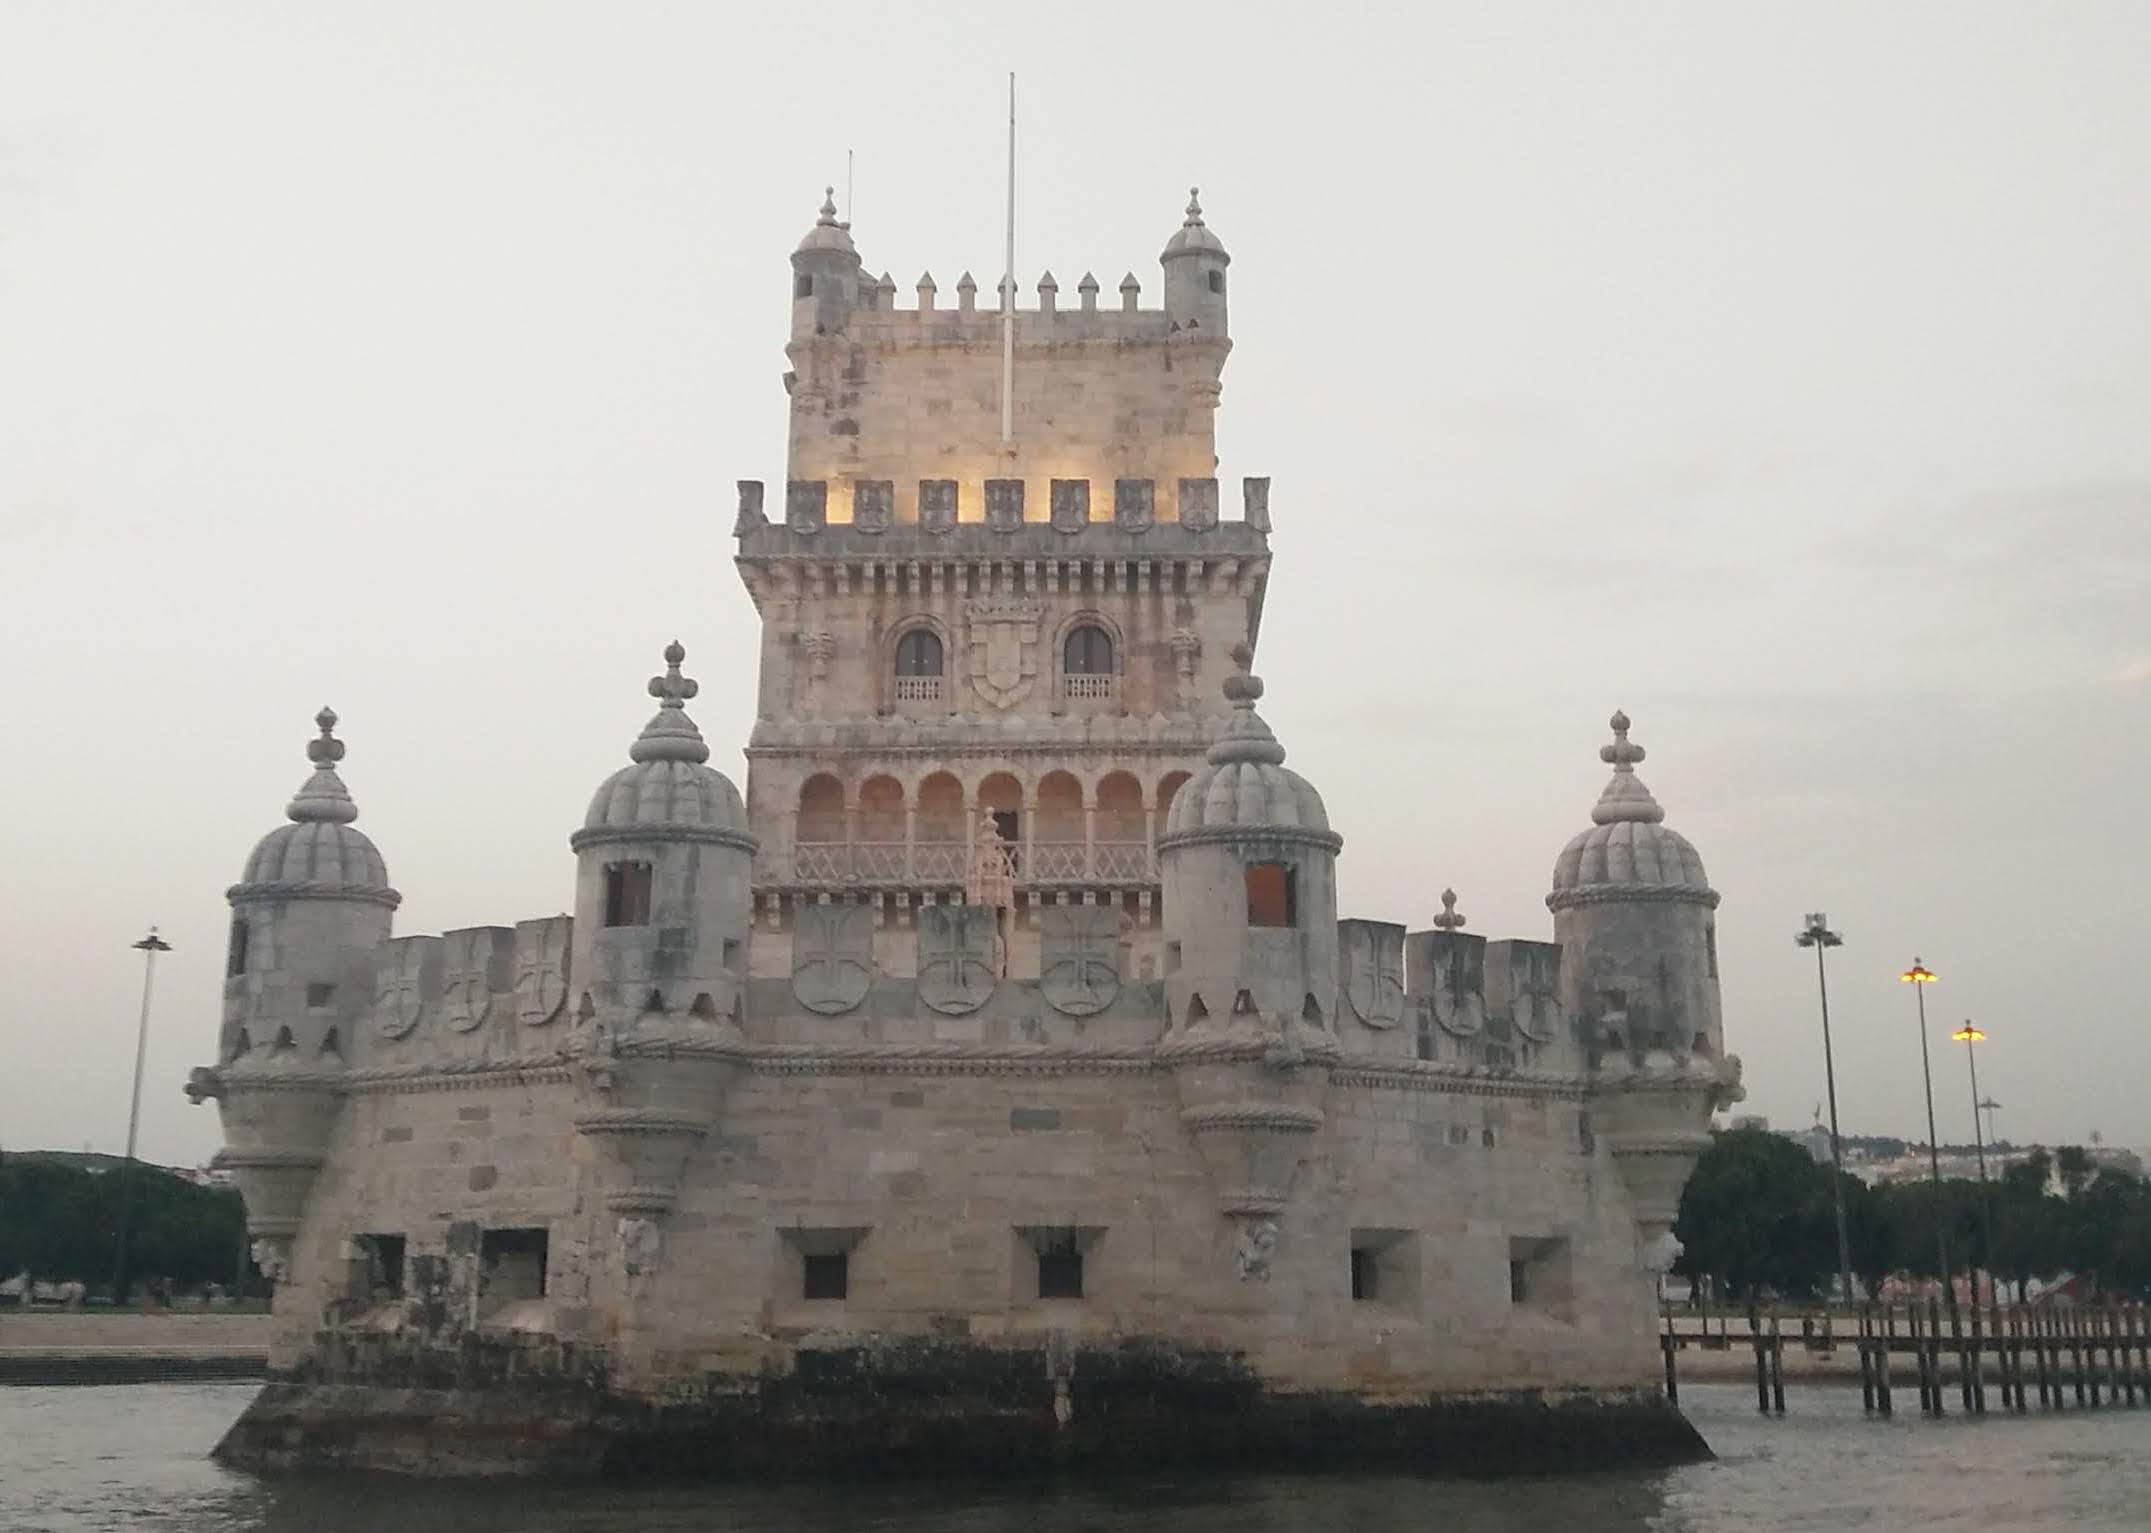 See Torre de Belém on this Tagus Cruise in Lisbon